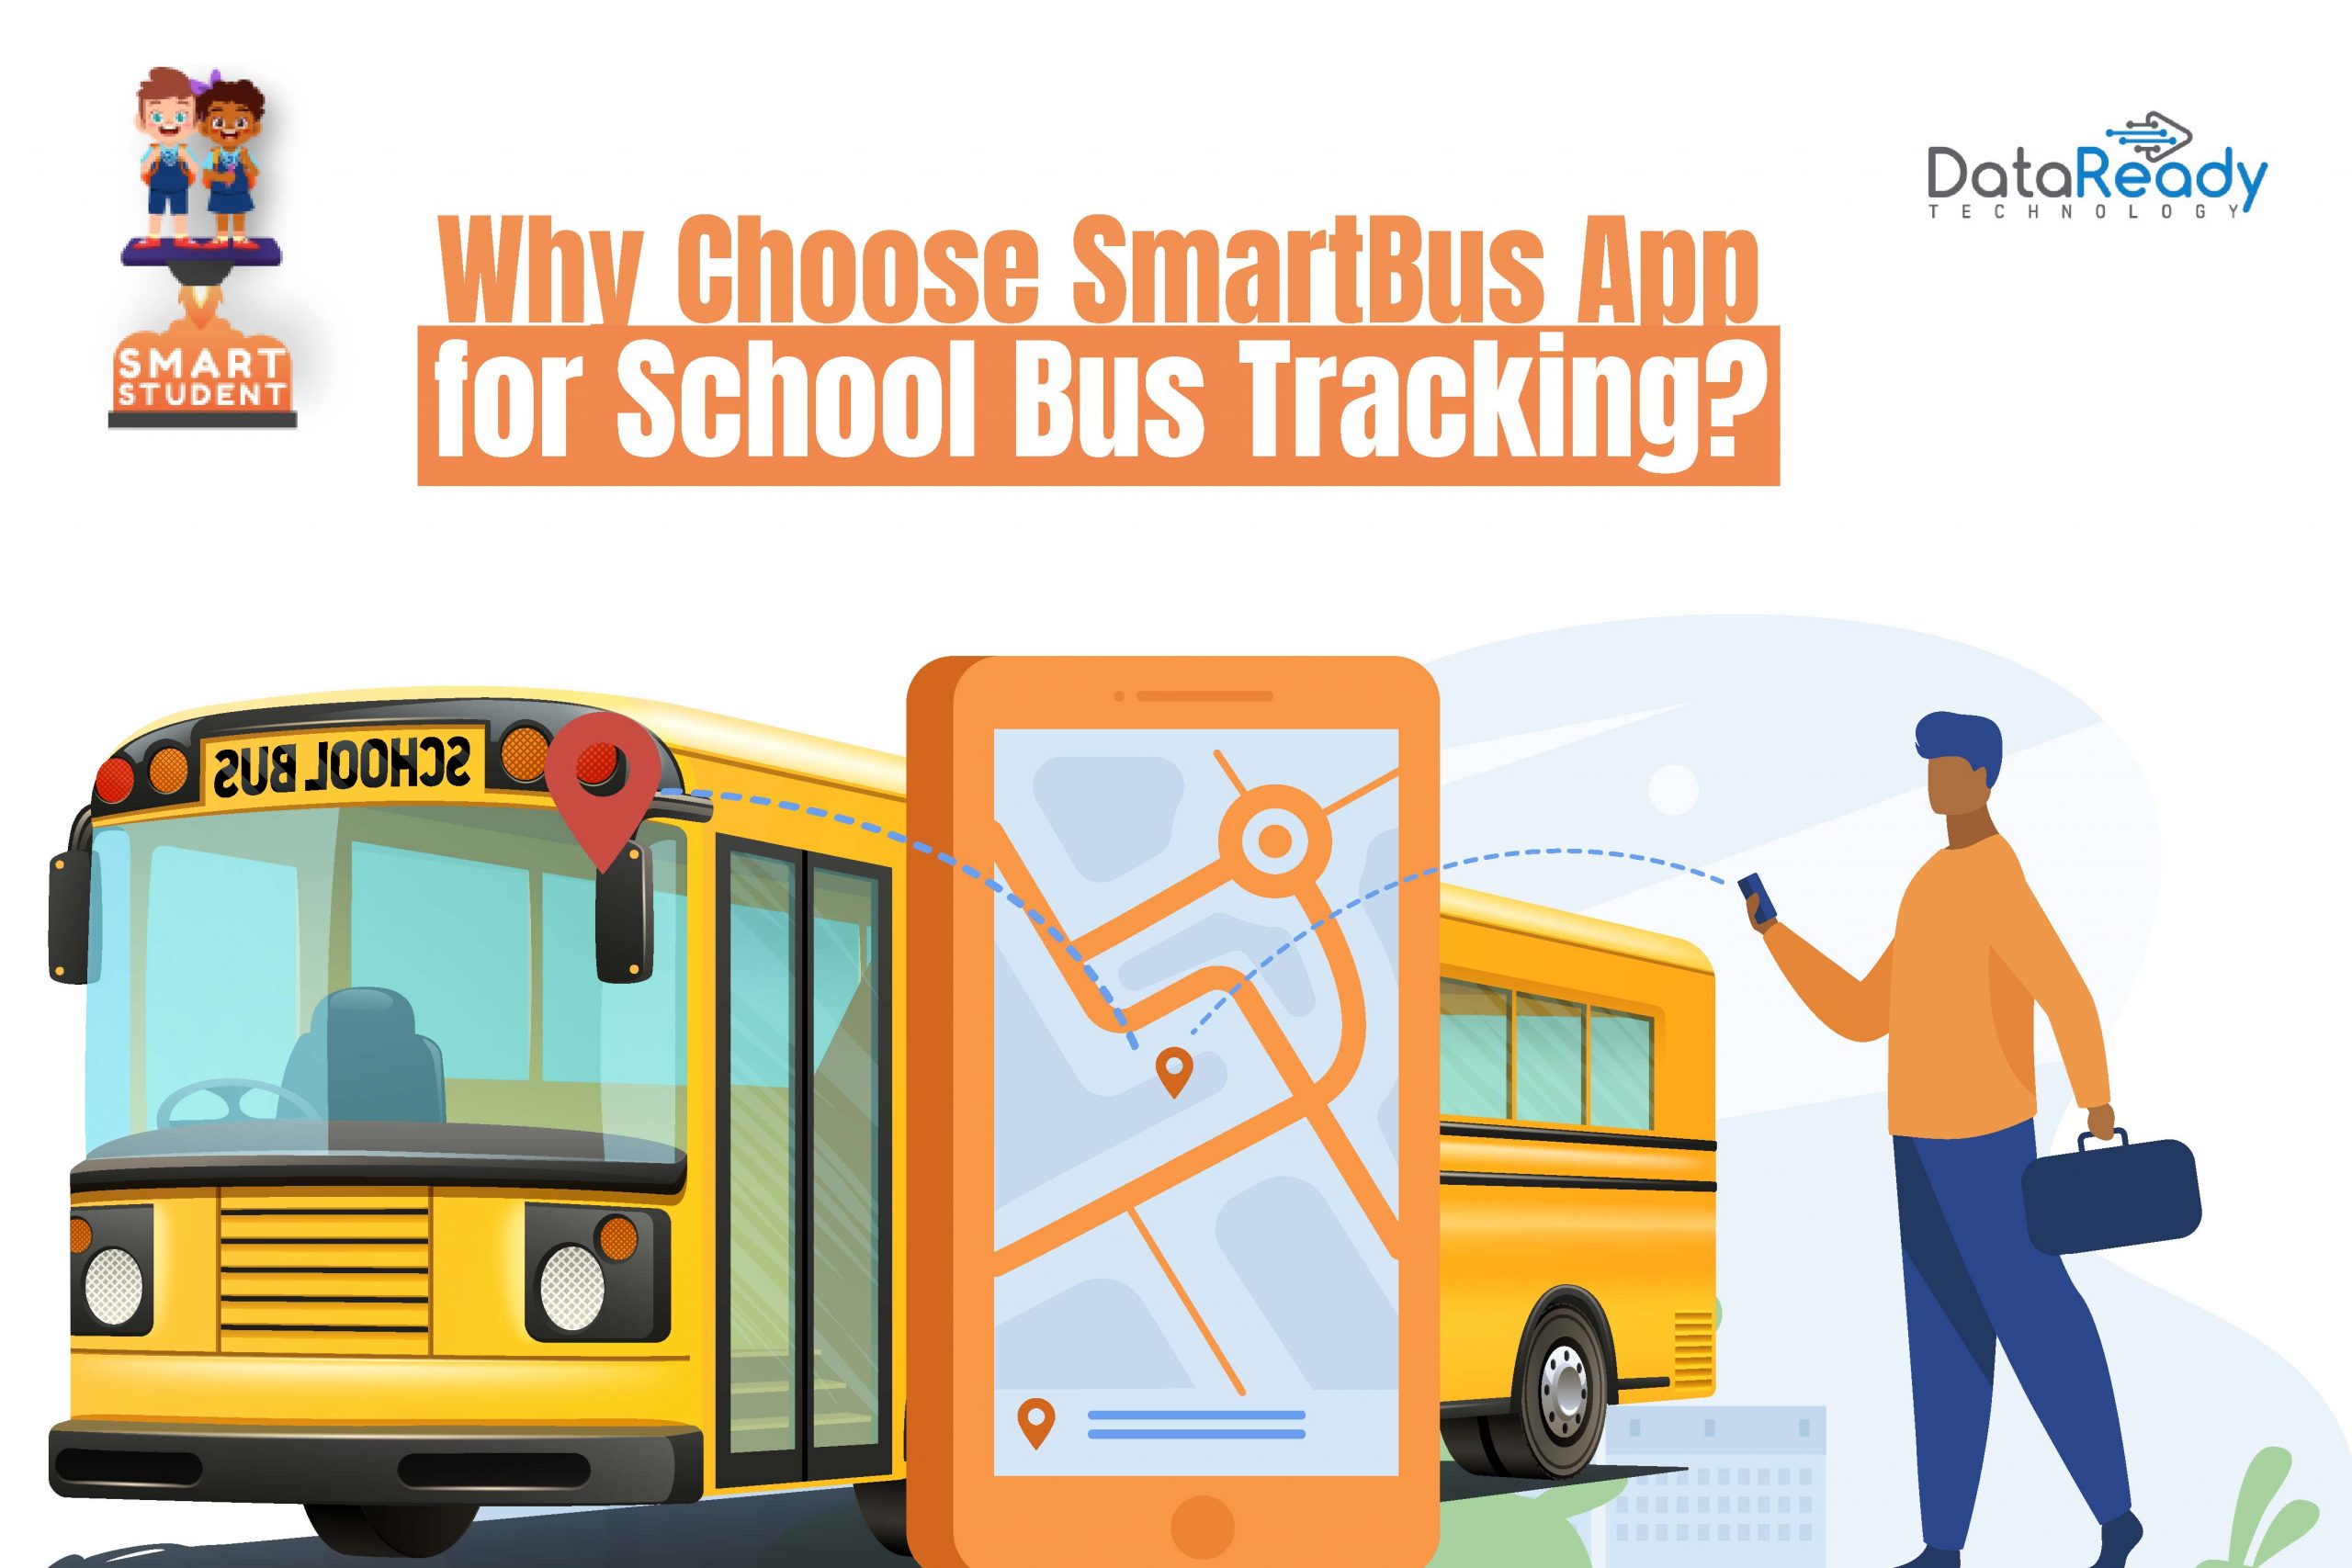 Why Choose SmartBus App for School Bus Tracking?